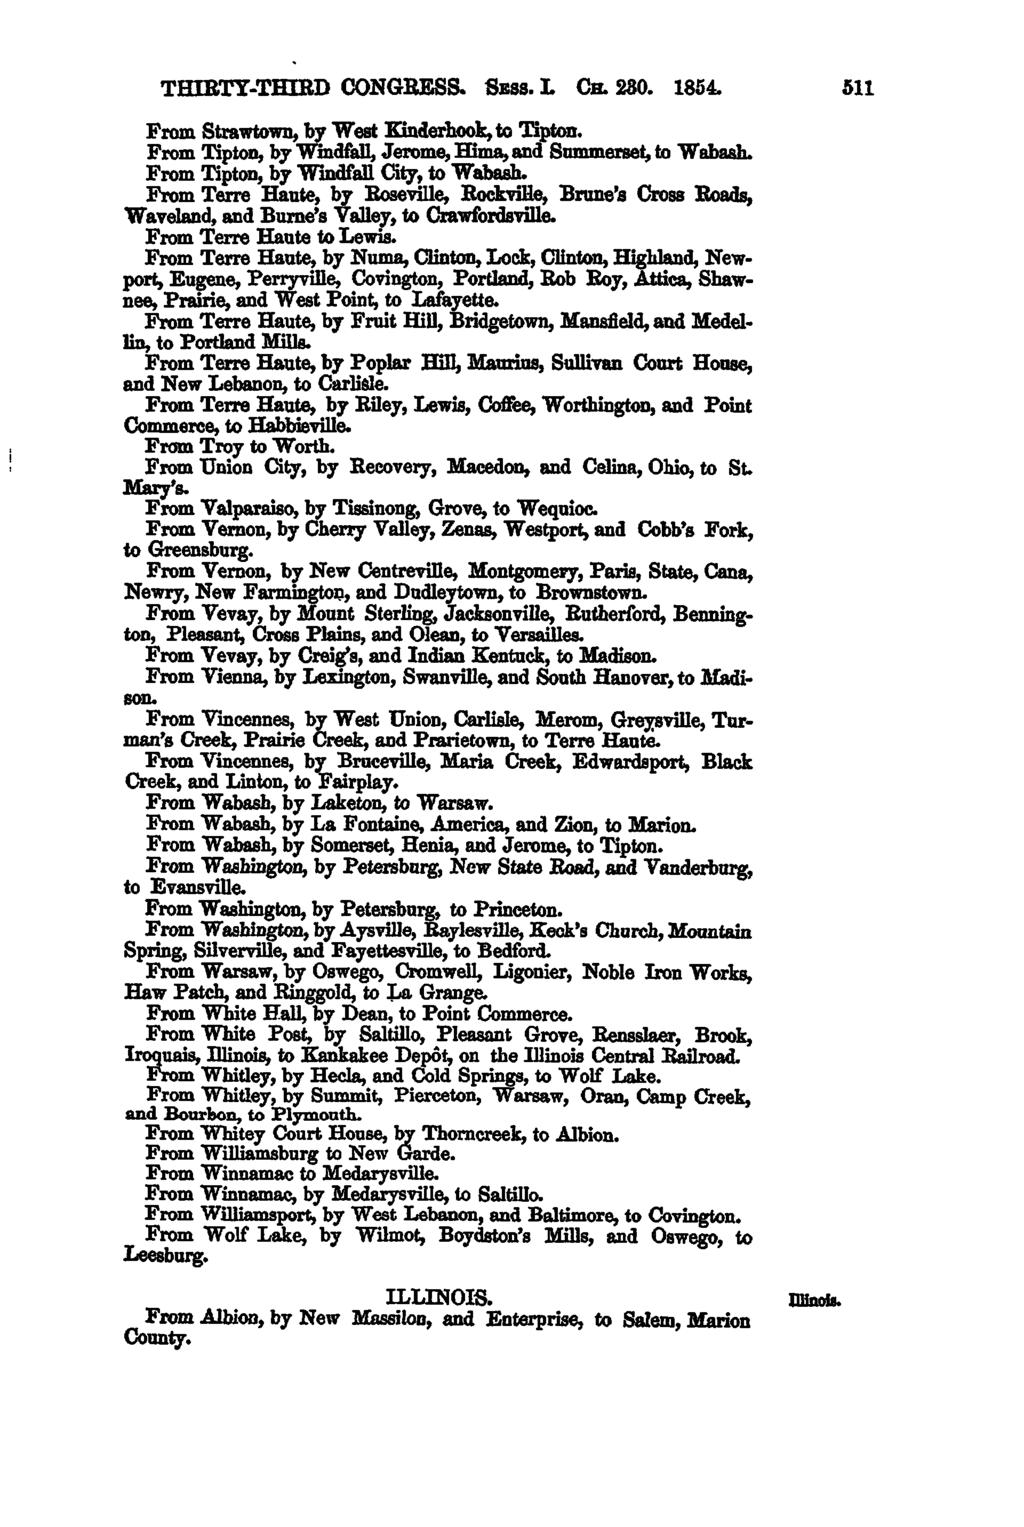 THIRTYTHIRD CONGRESS. Sass. L Cs. 280. 1854. 511 From Strawtown, by West Kinderhook, to Tipton. From Tipton, by Windfall, Jerome, Hima, and Summerset, to Wabash.